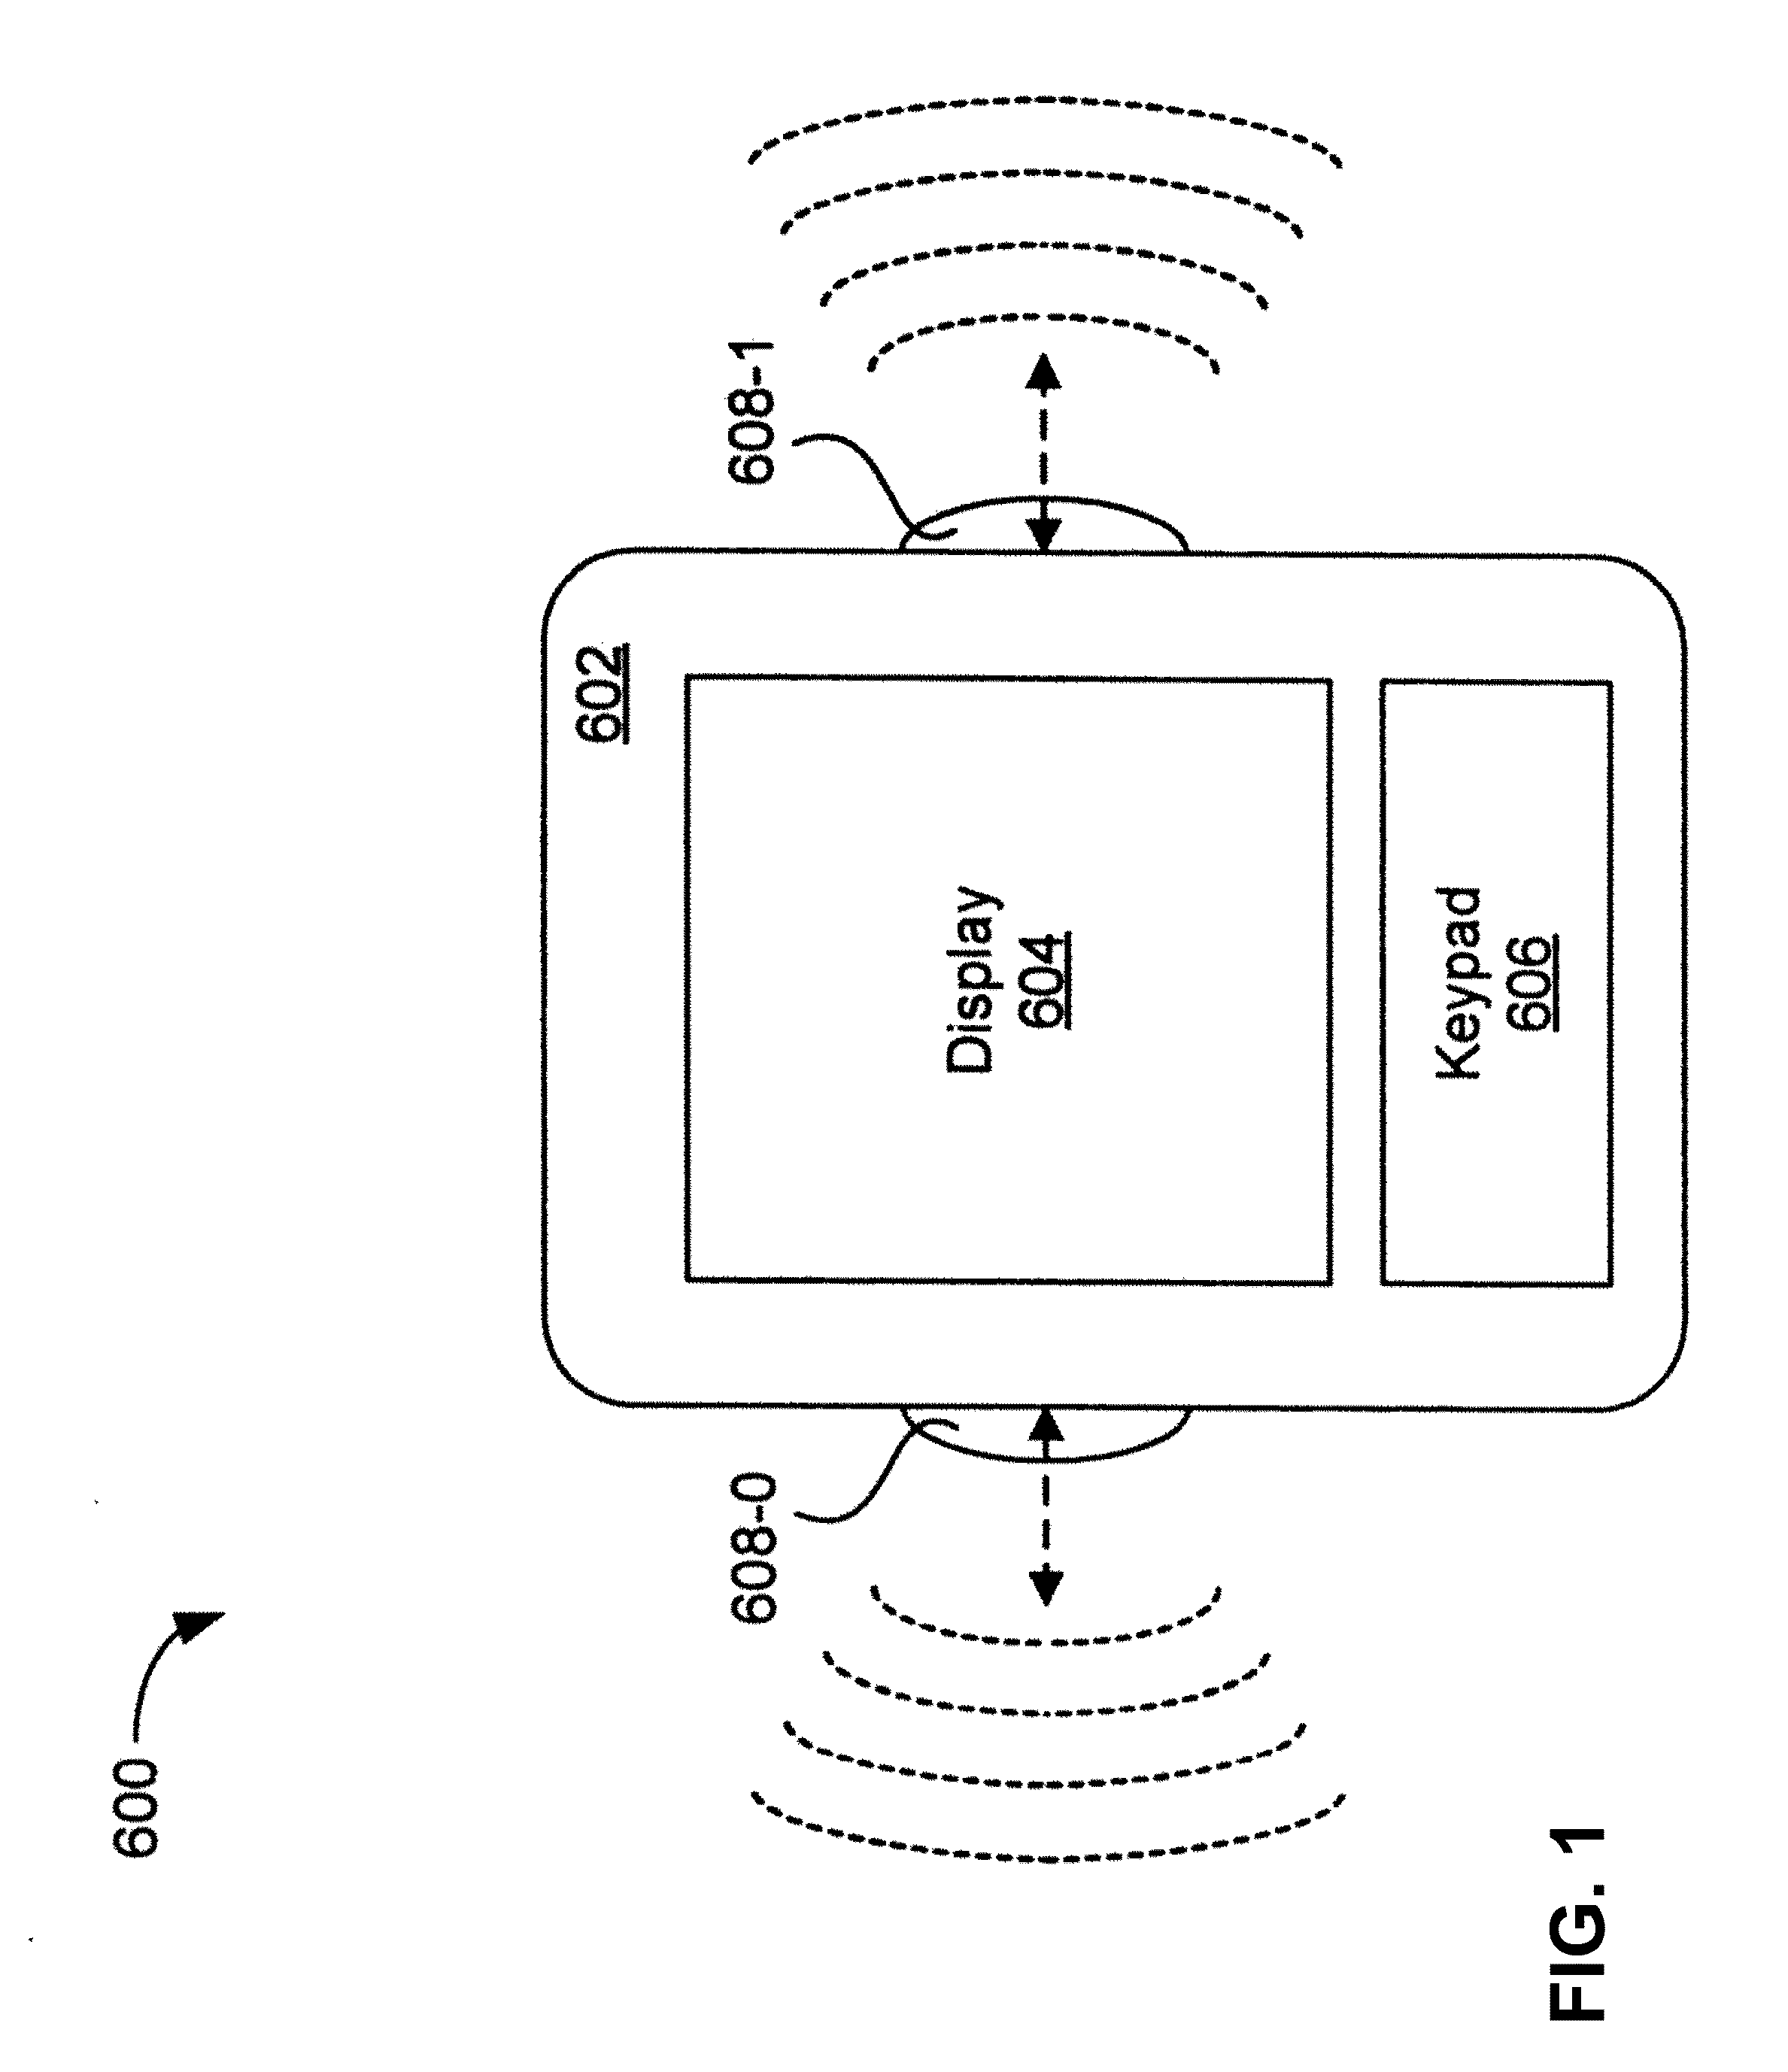 Method and apparatus for providing a haptic feedback shape-changing display